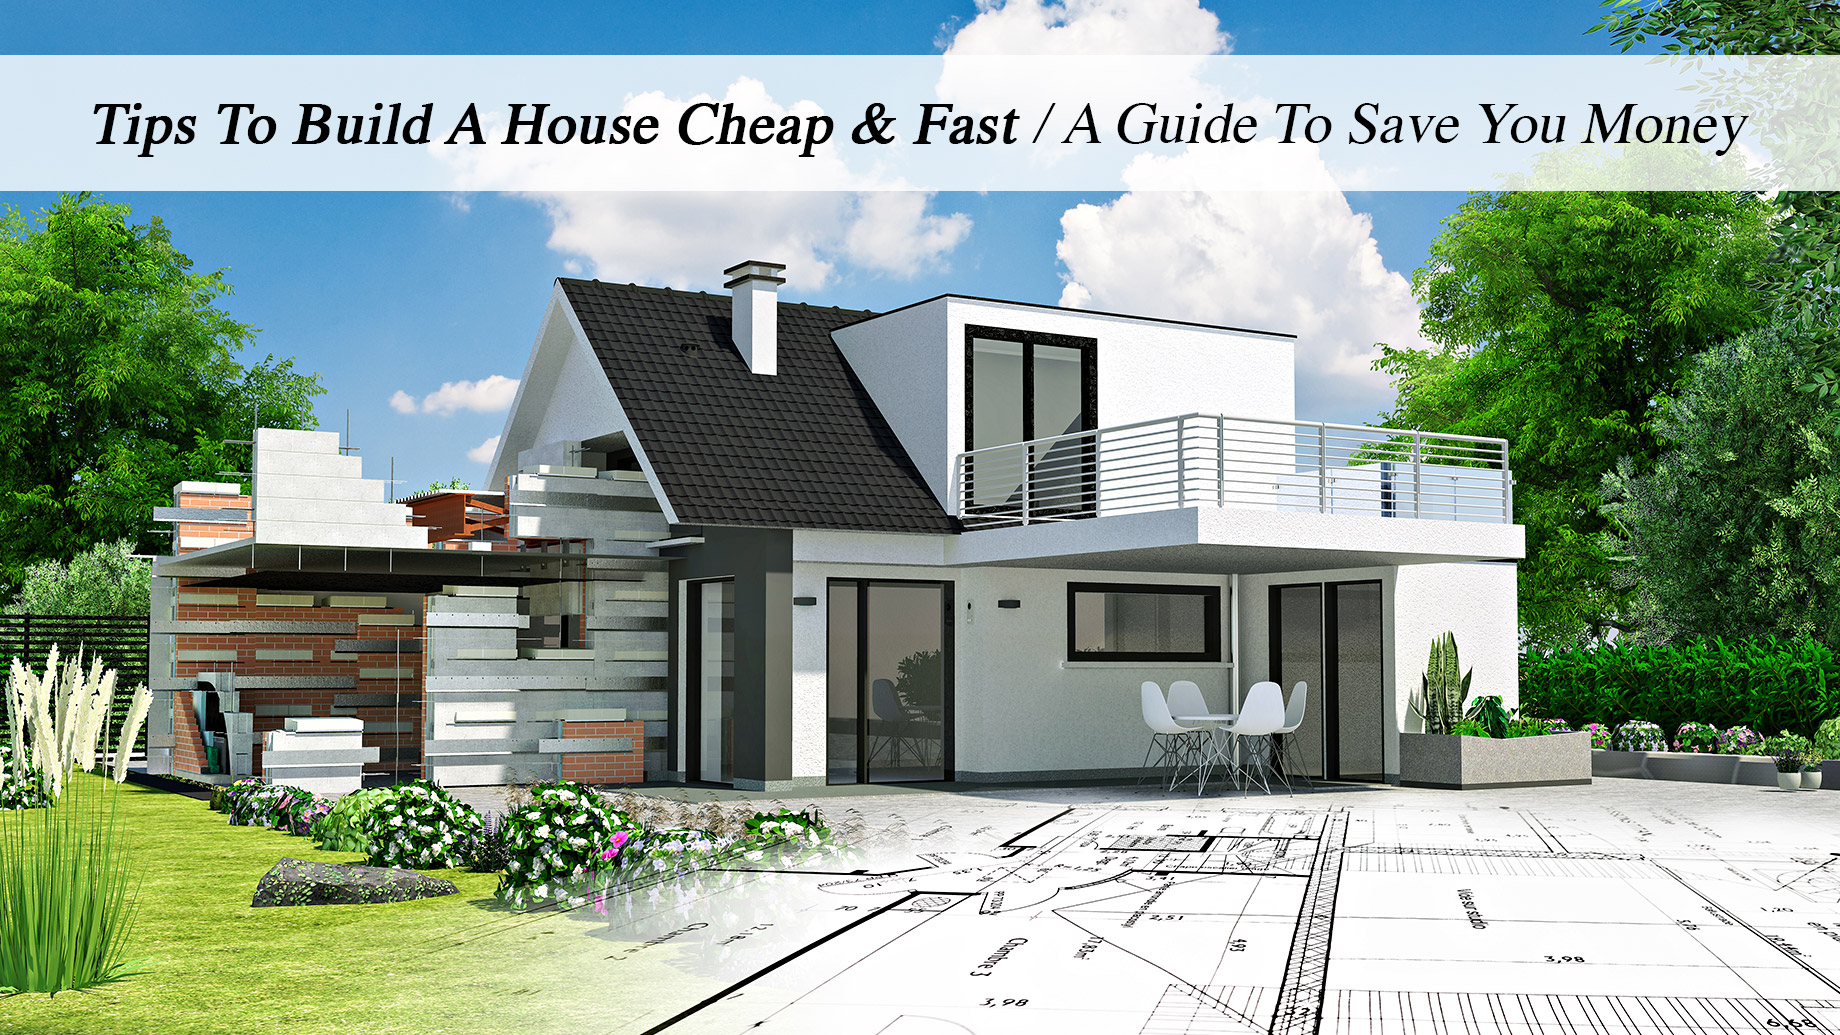 Tips To Build A House Cheap & Fast - A Guide To Save You Money